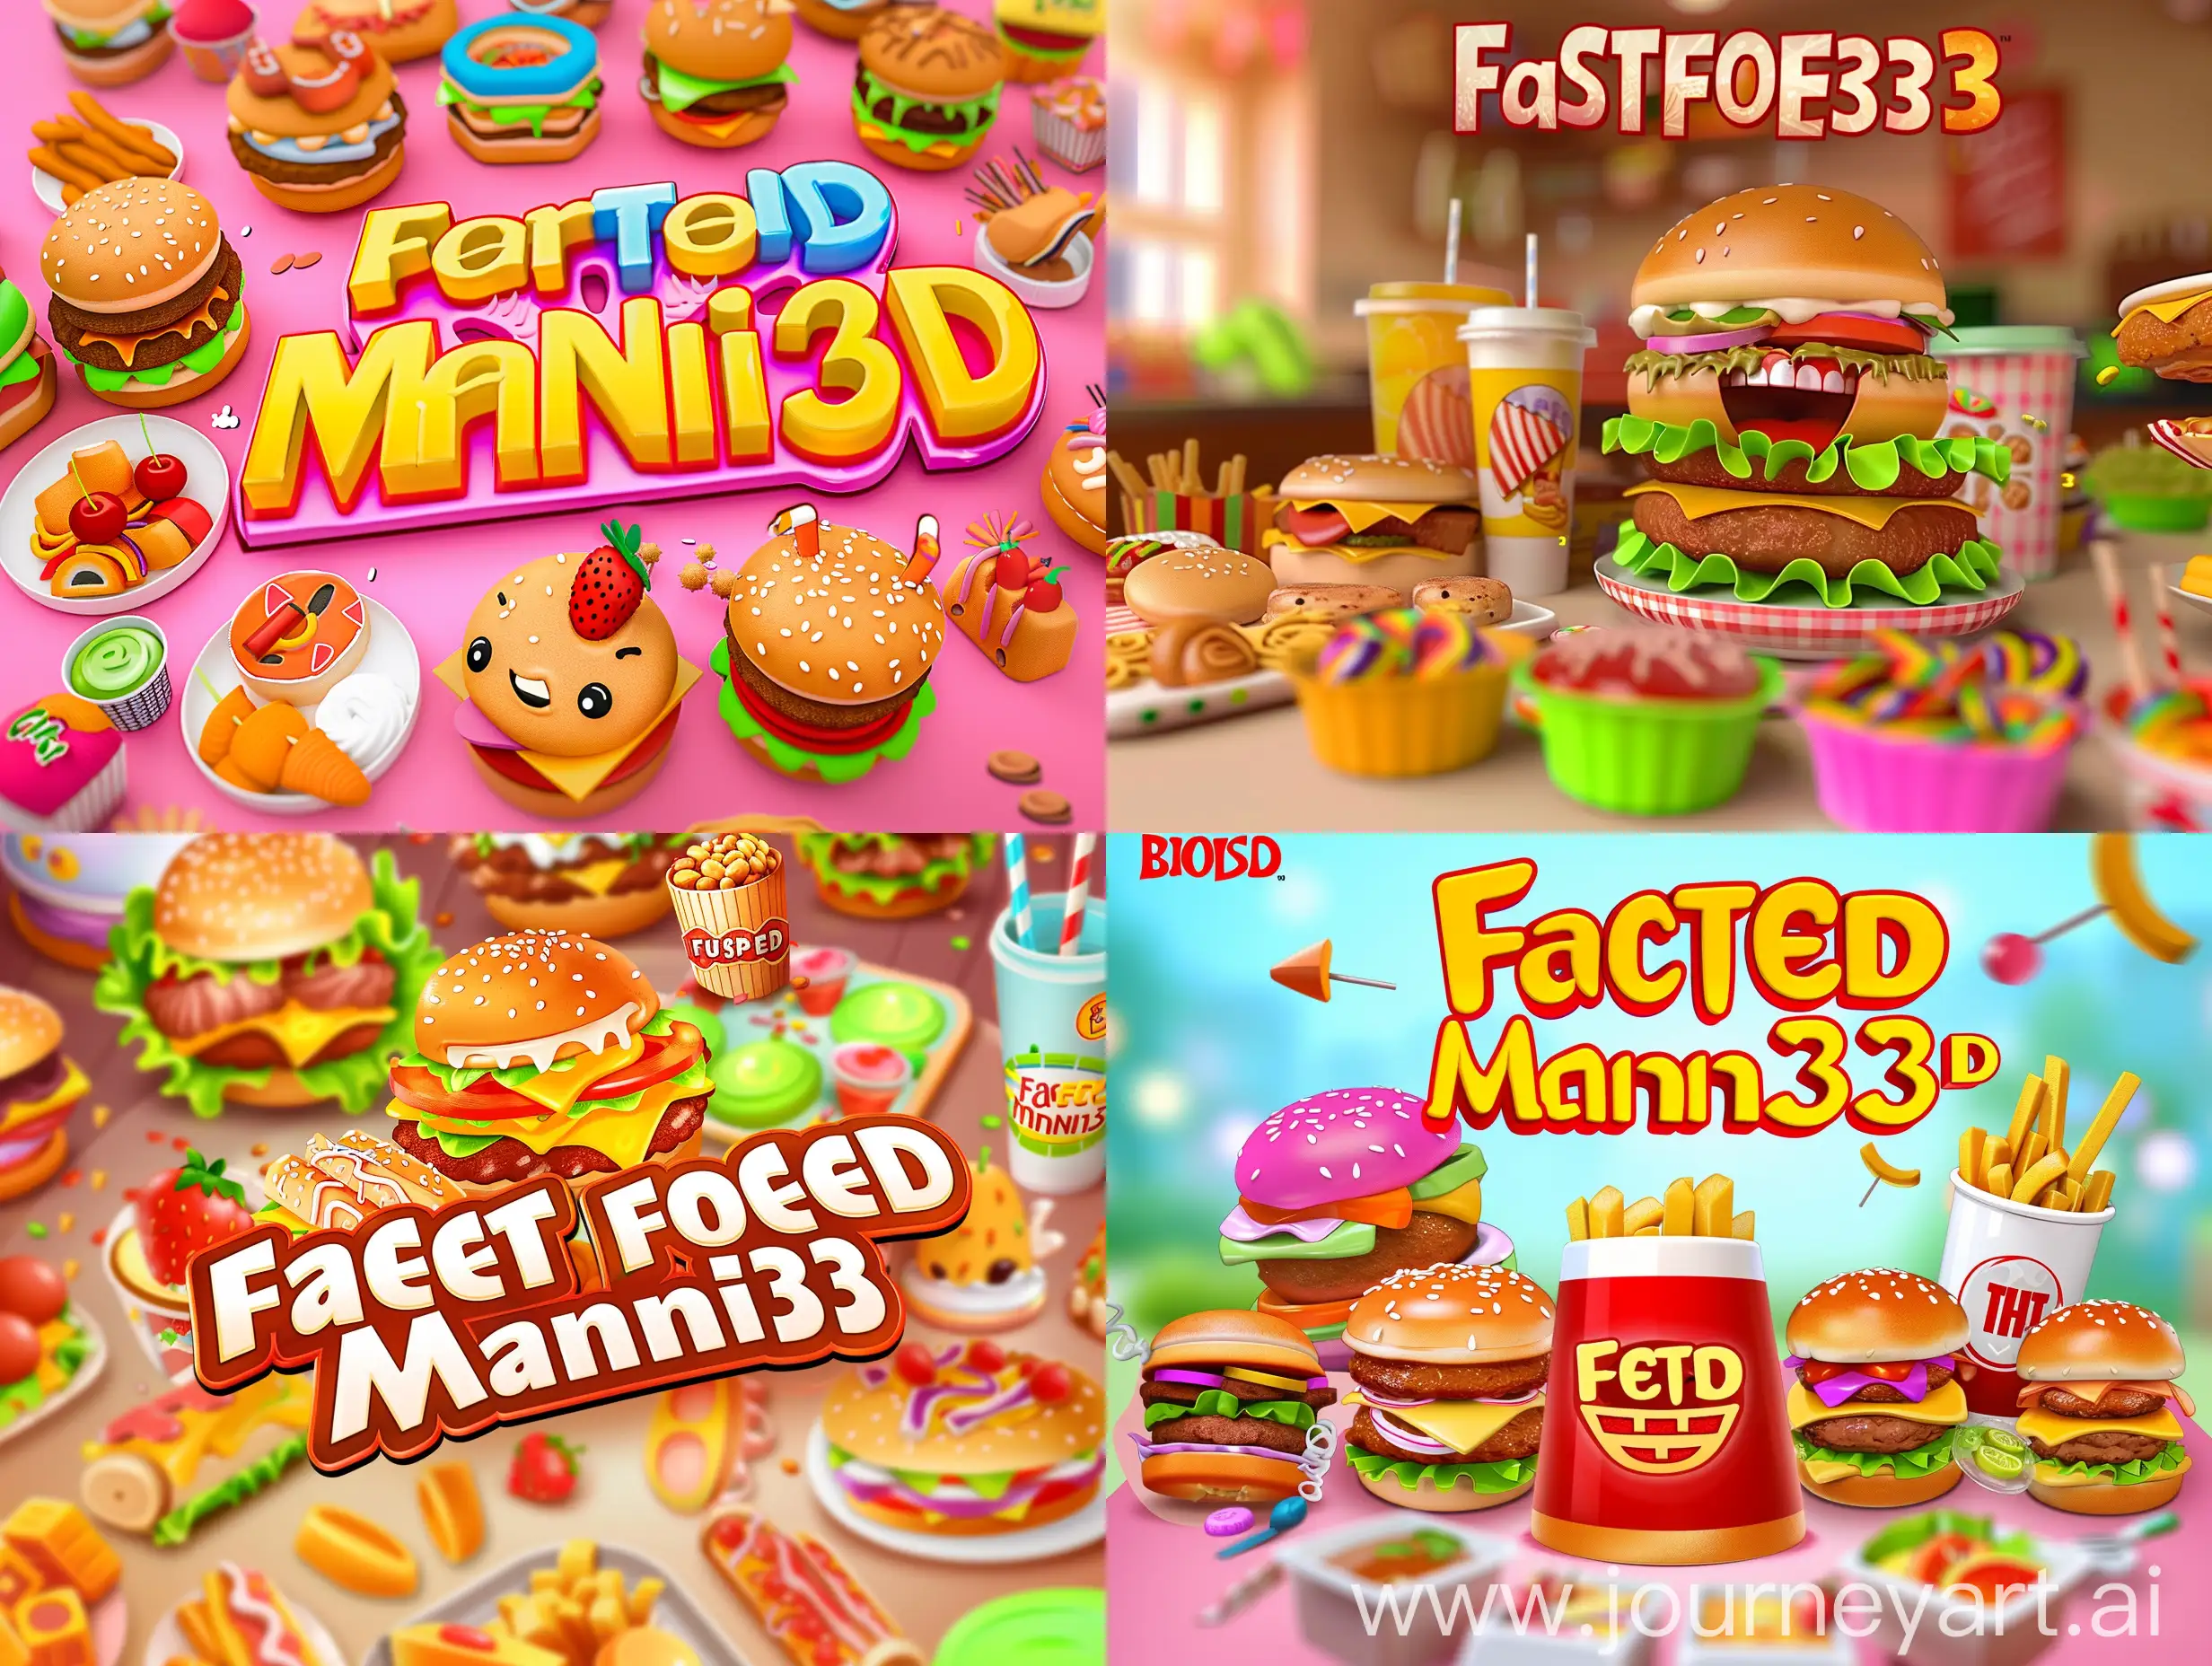 Computer game cover, fast food, match 3, children's, cute, inscription "Fast Food Mania 3D" 